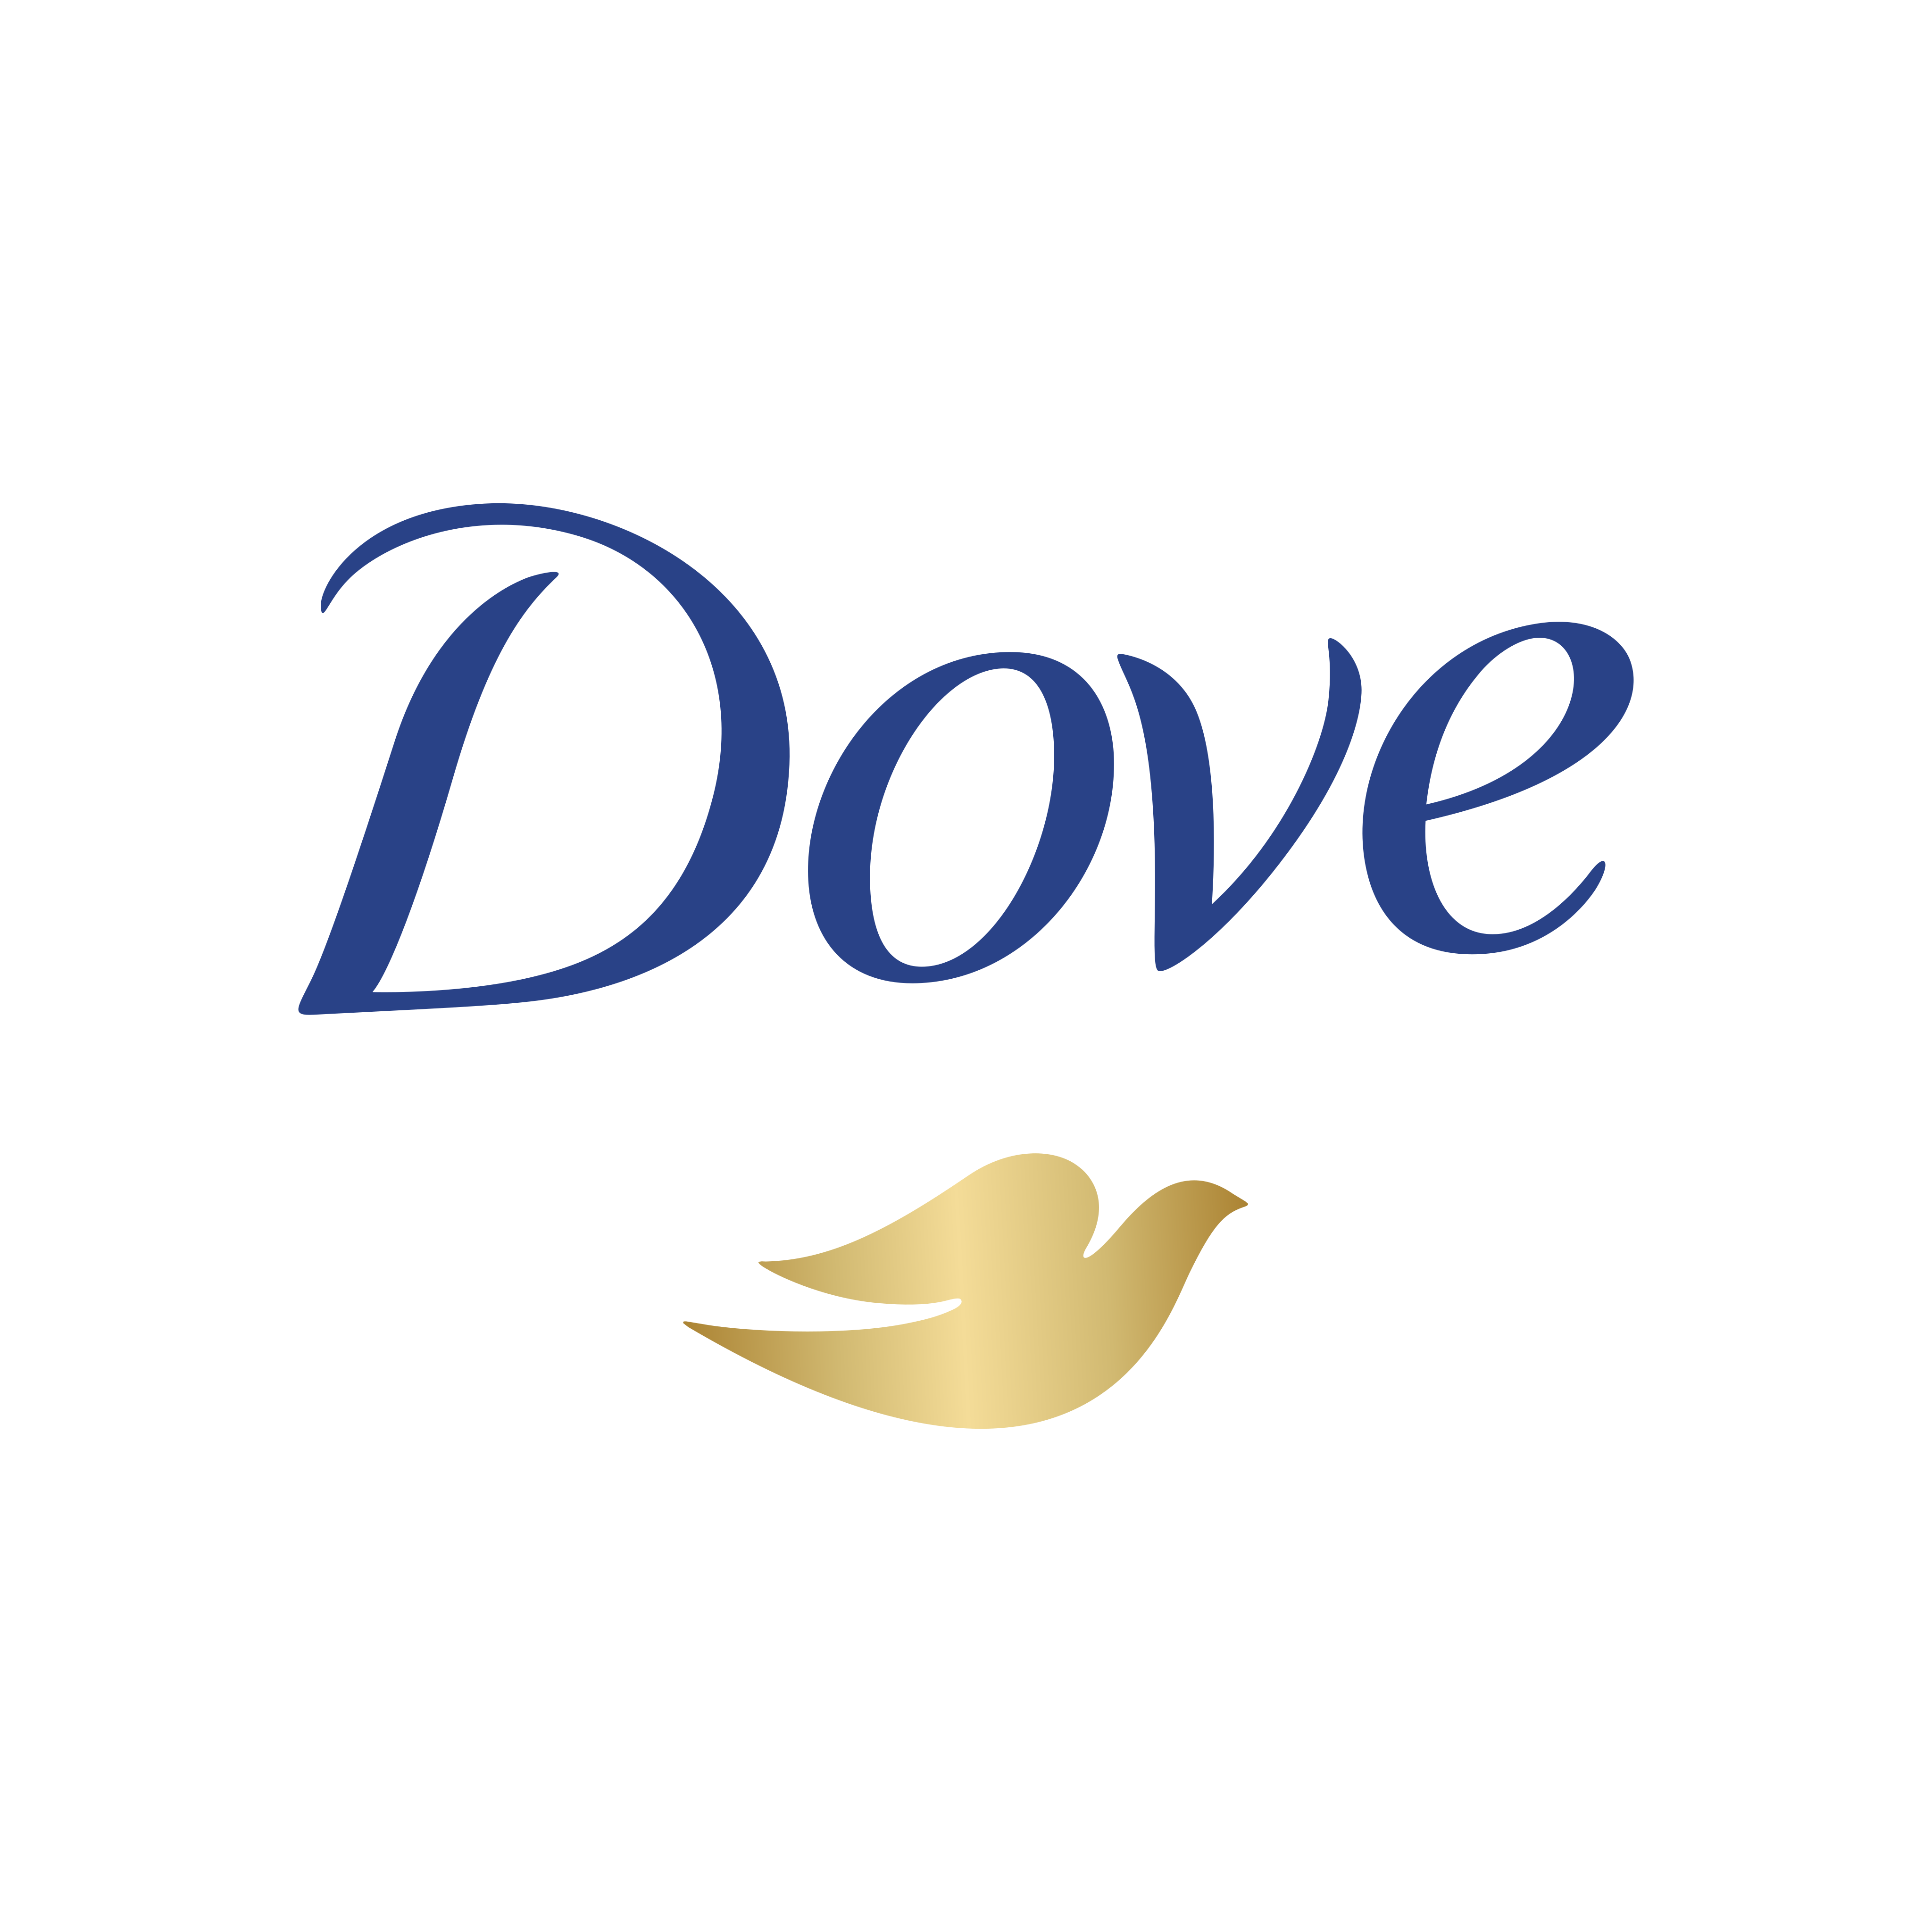 Dove Logo PNG.